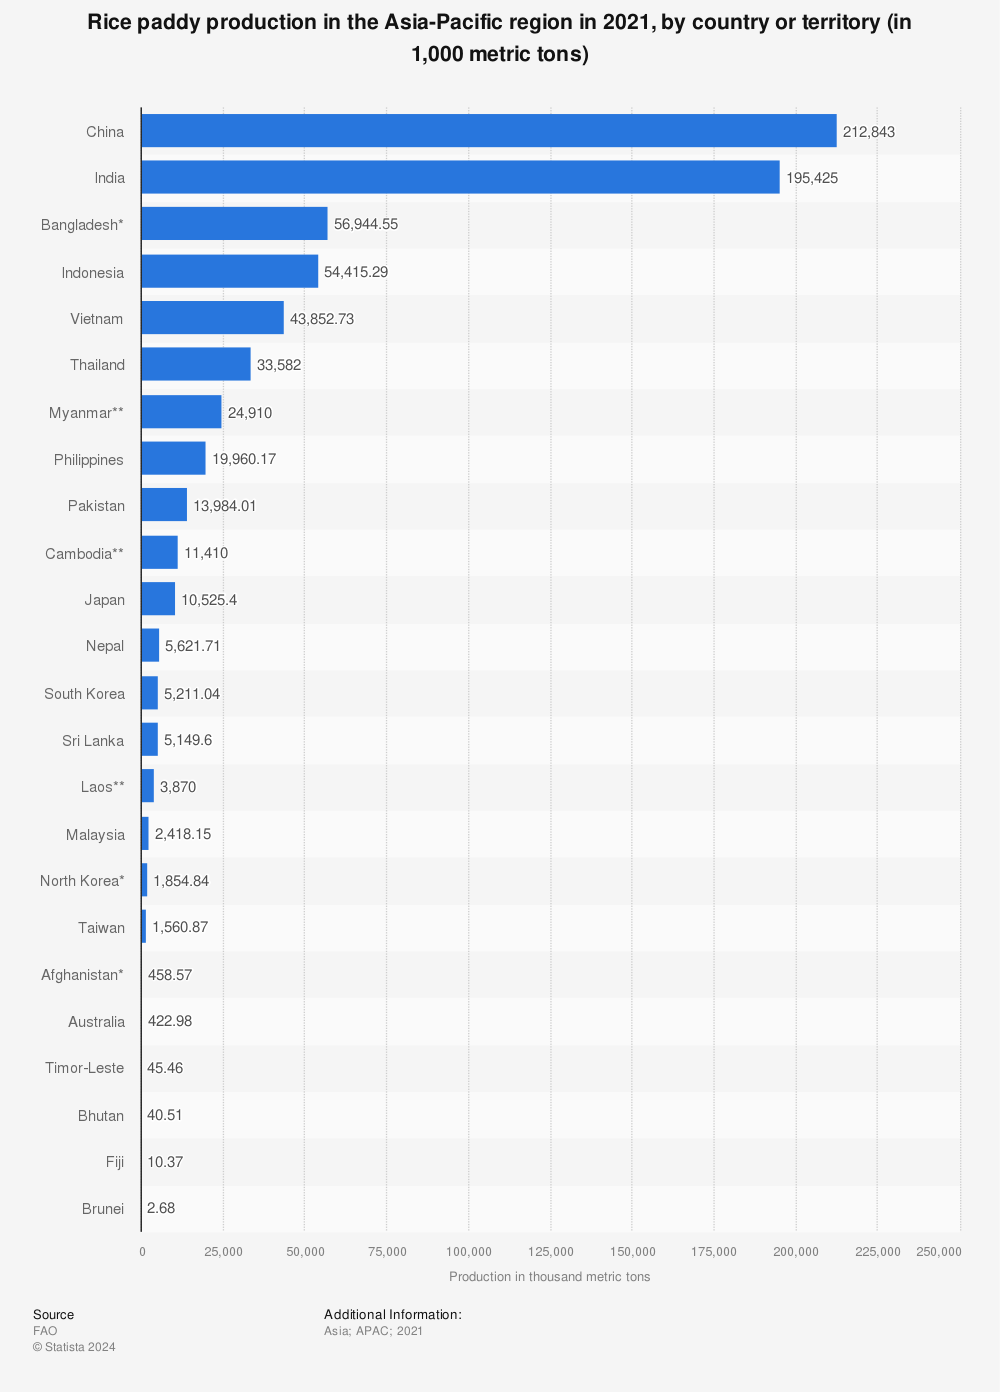 Statistic: Rice paddy production in the Asia-Pacific region in 2021, by country or territory (in 1,000 metric tons) | Statista